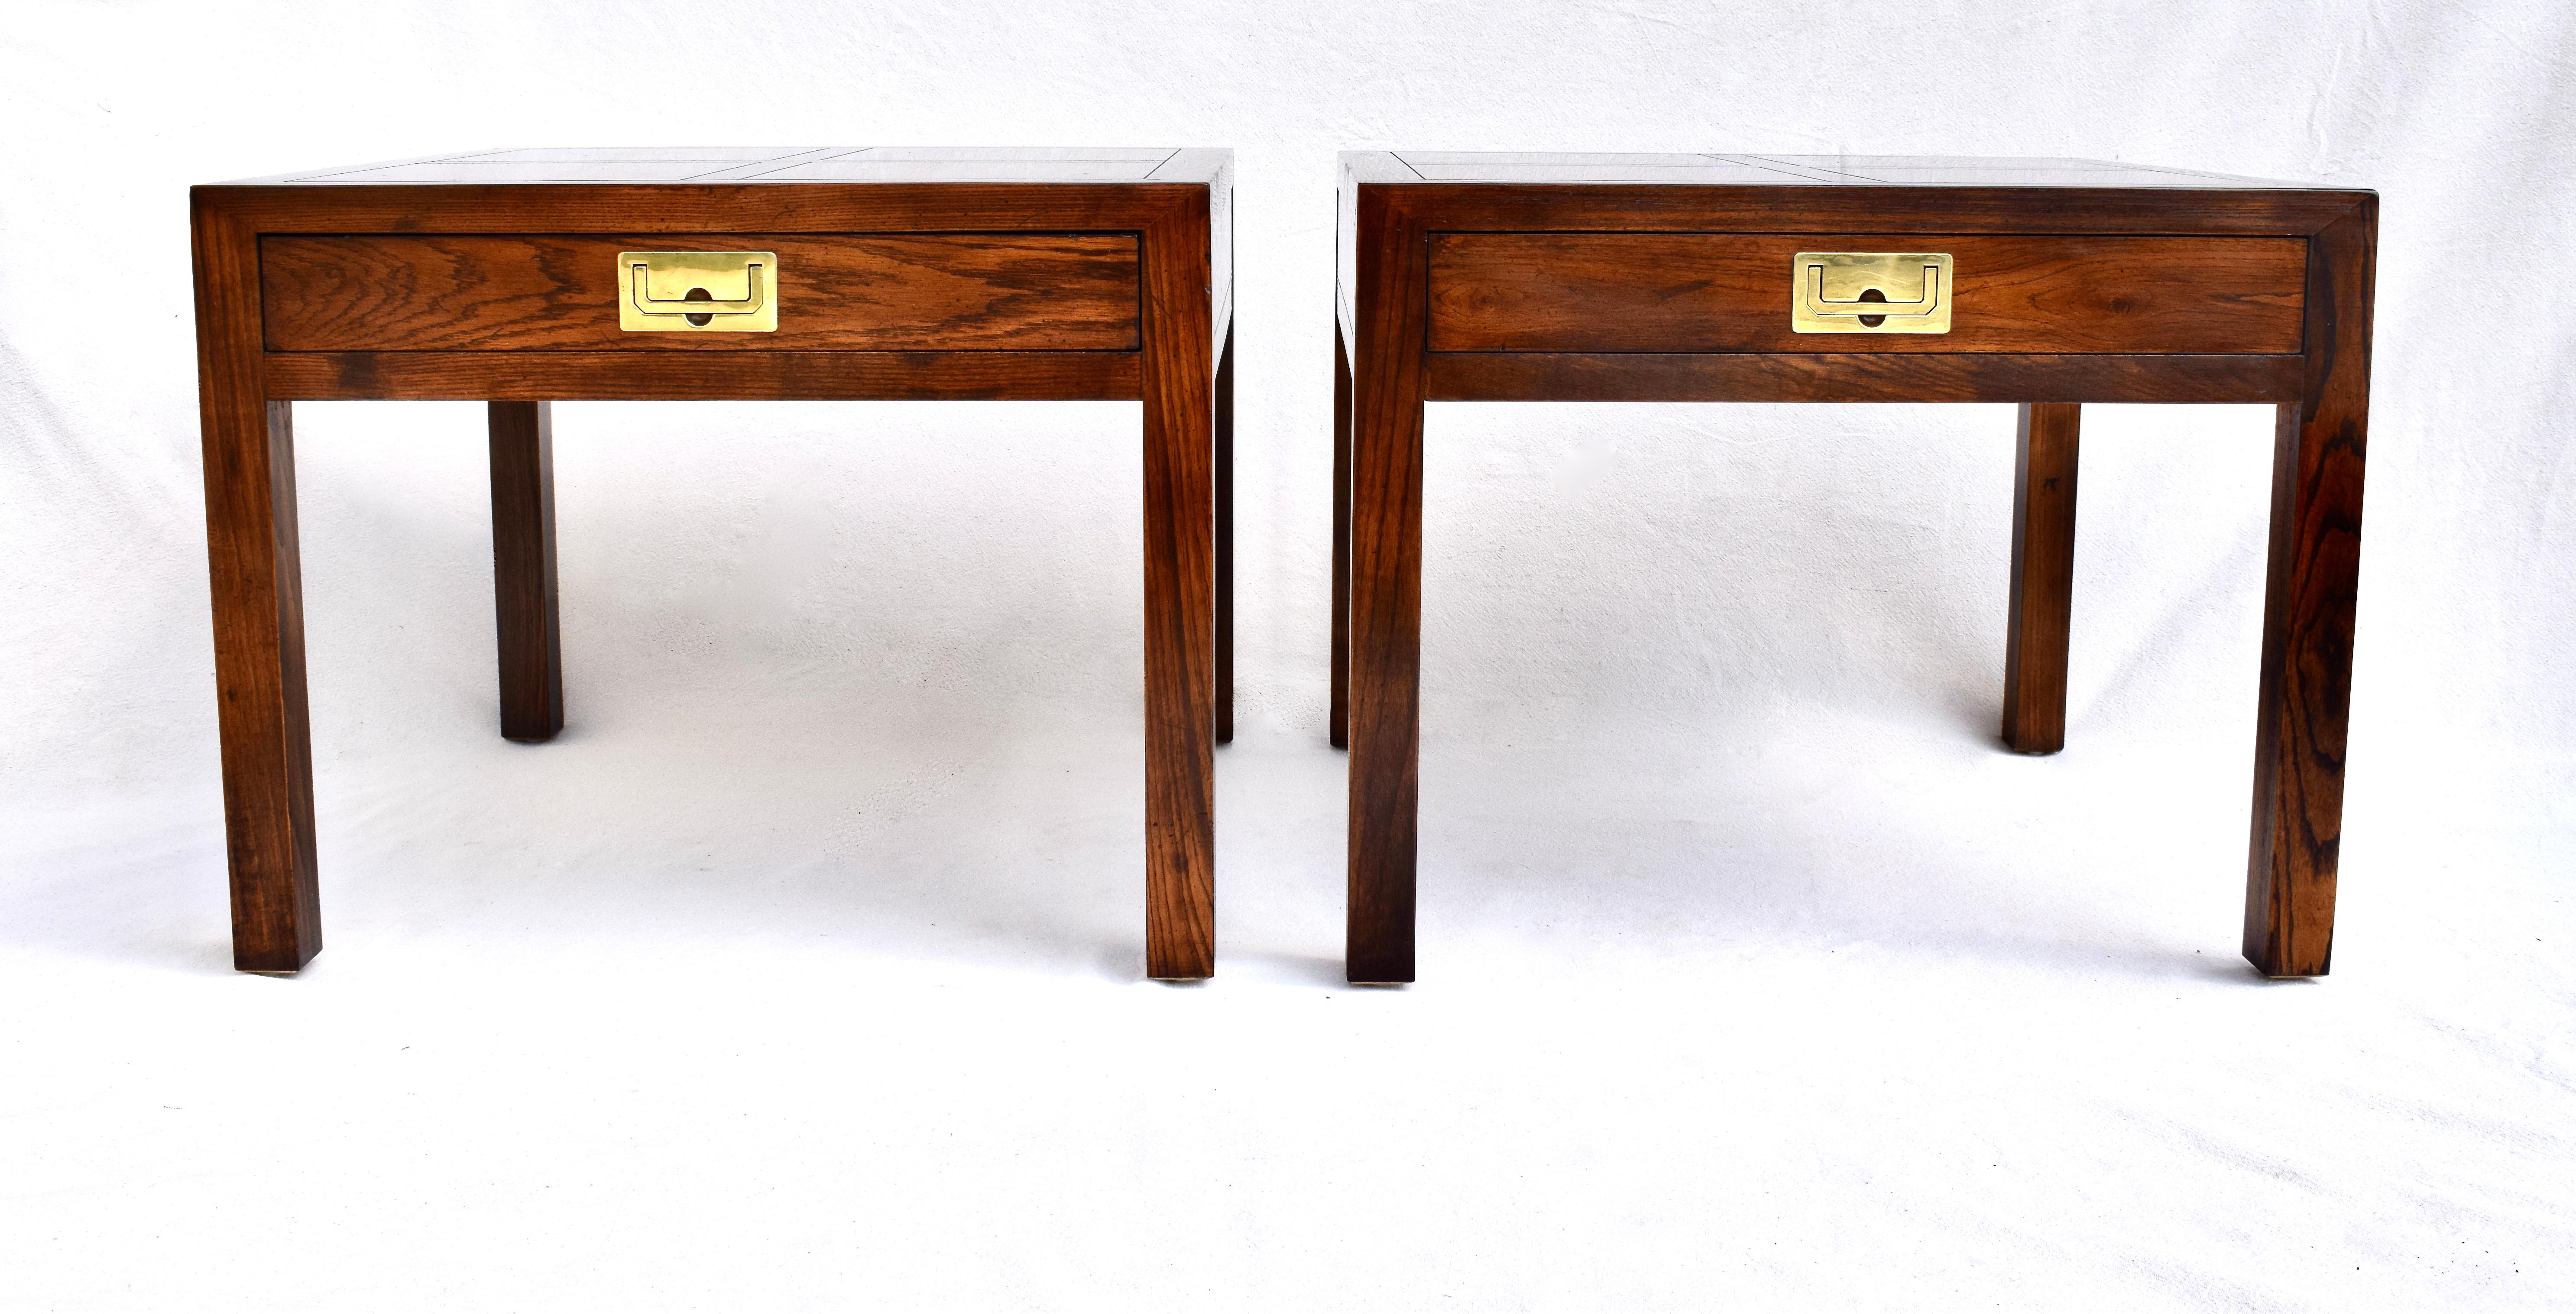 Classic Campaign styling from Henredon, pair of burl wide body walnut parsons side (or end) tables having a single recessed brass pull and striking parquetry tops.